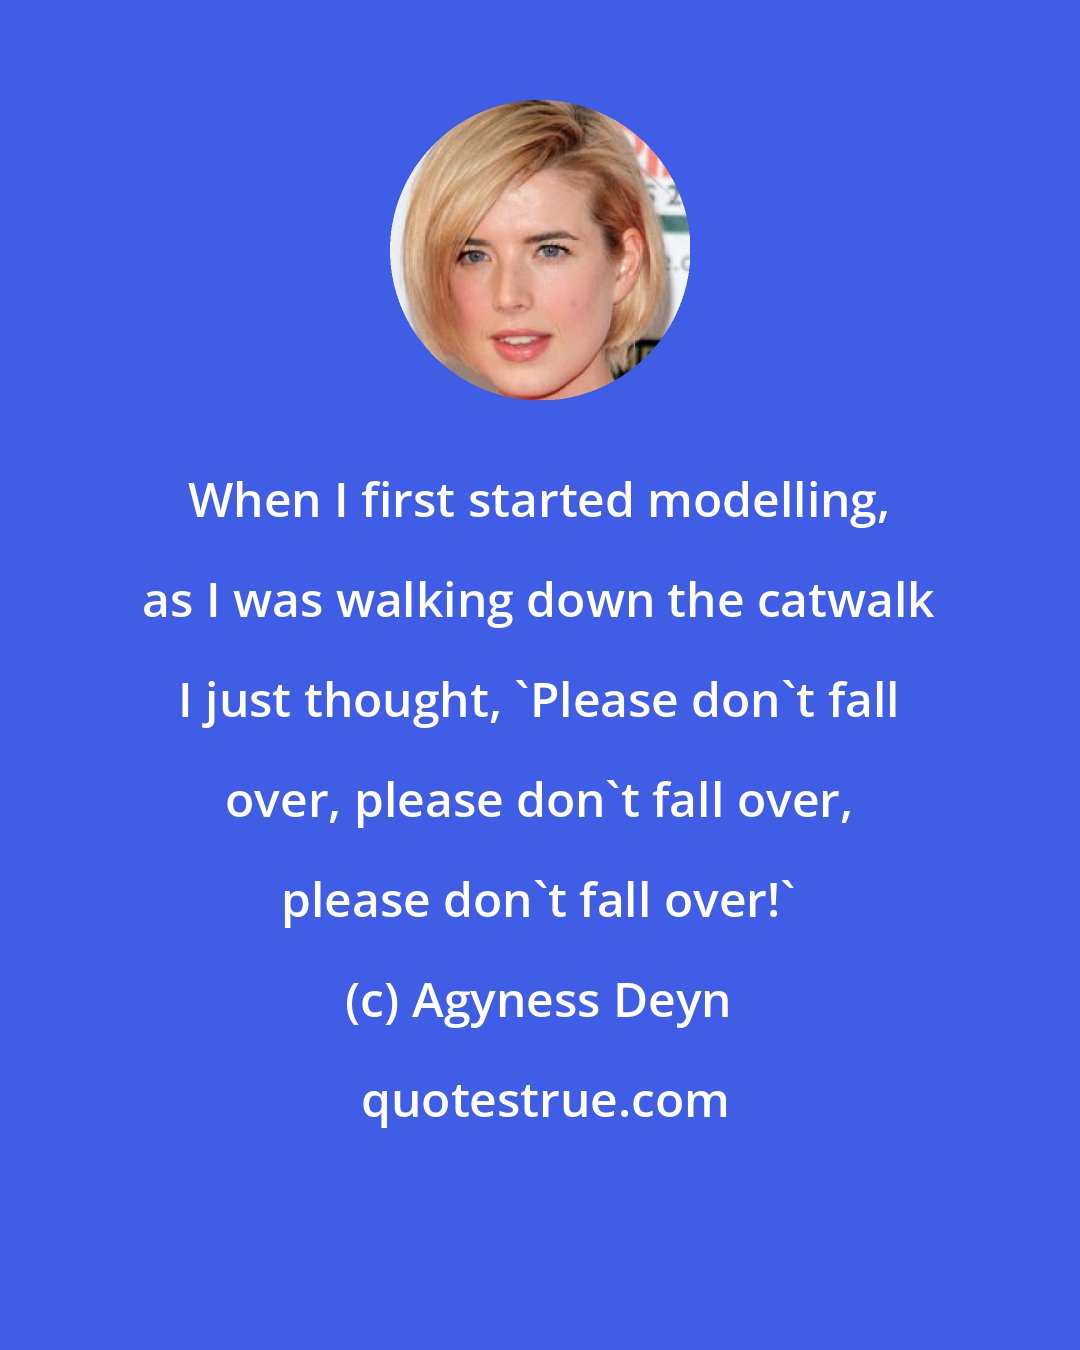 Agyness Deyn: When I first started modelling, as I was walking down the catwalk I just thought, 'Please don't fall over, please don't fall over, please don't fall over!'